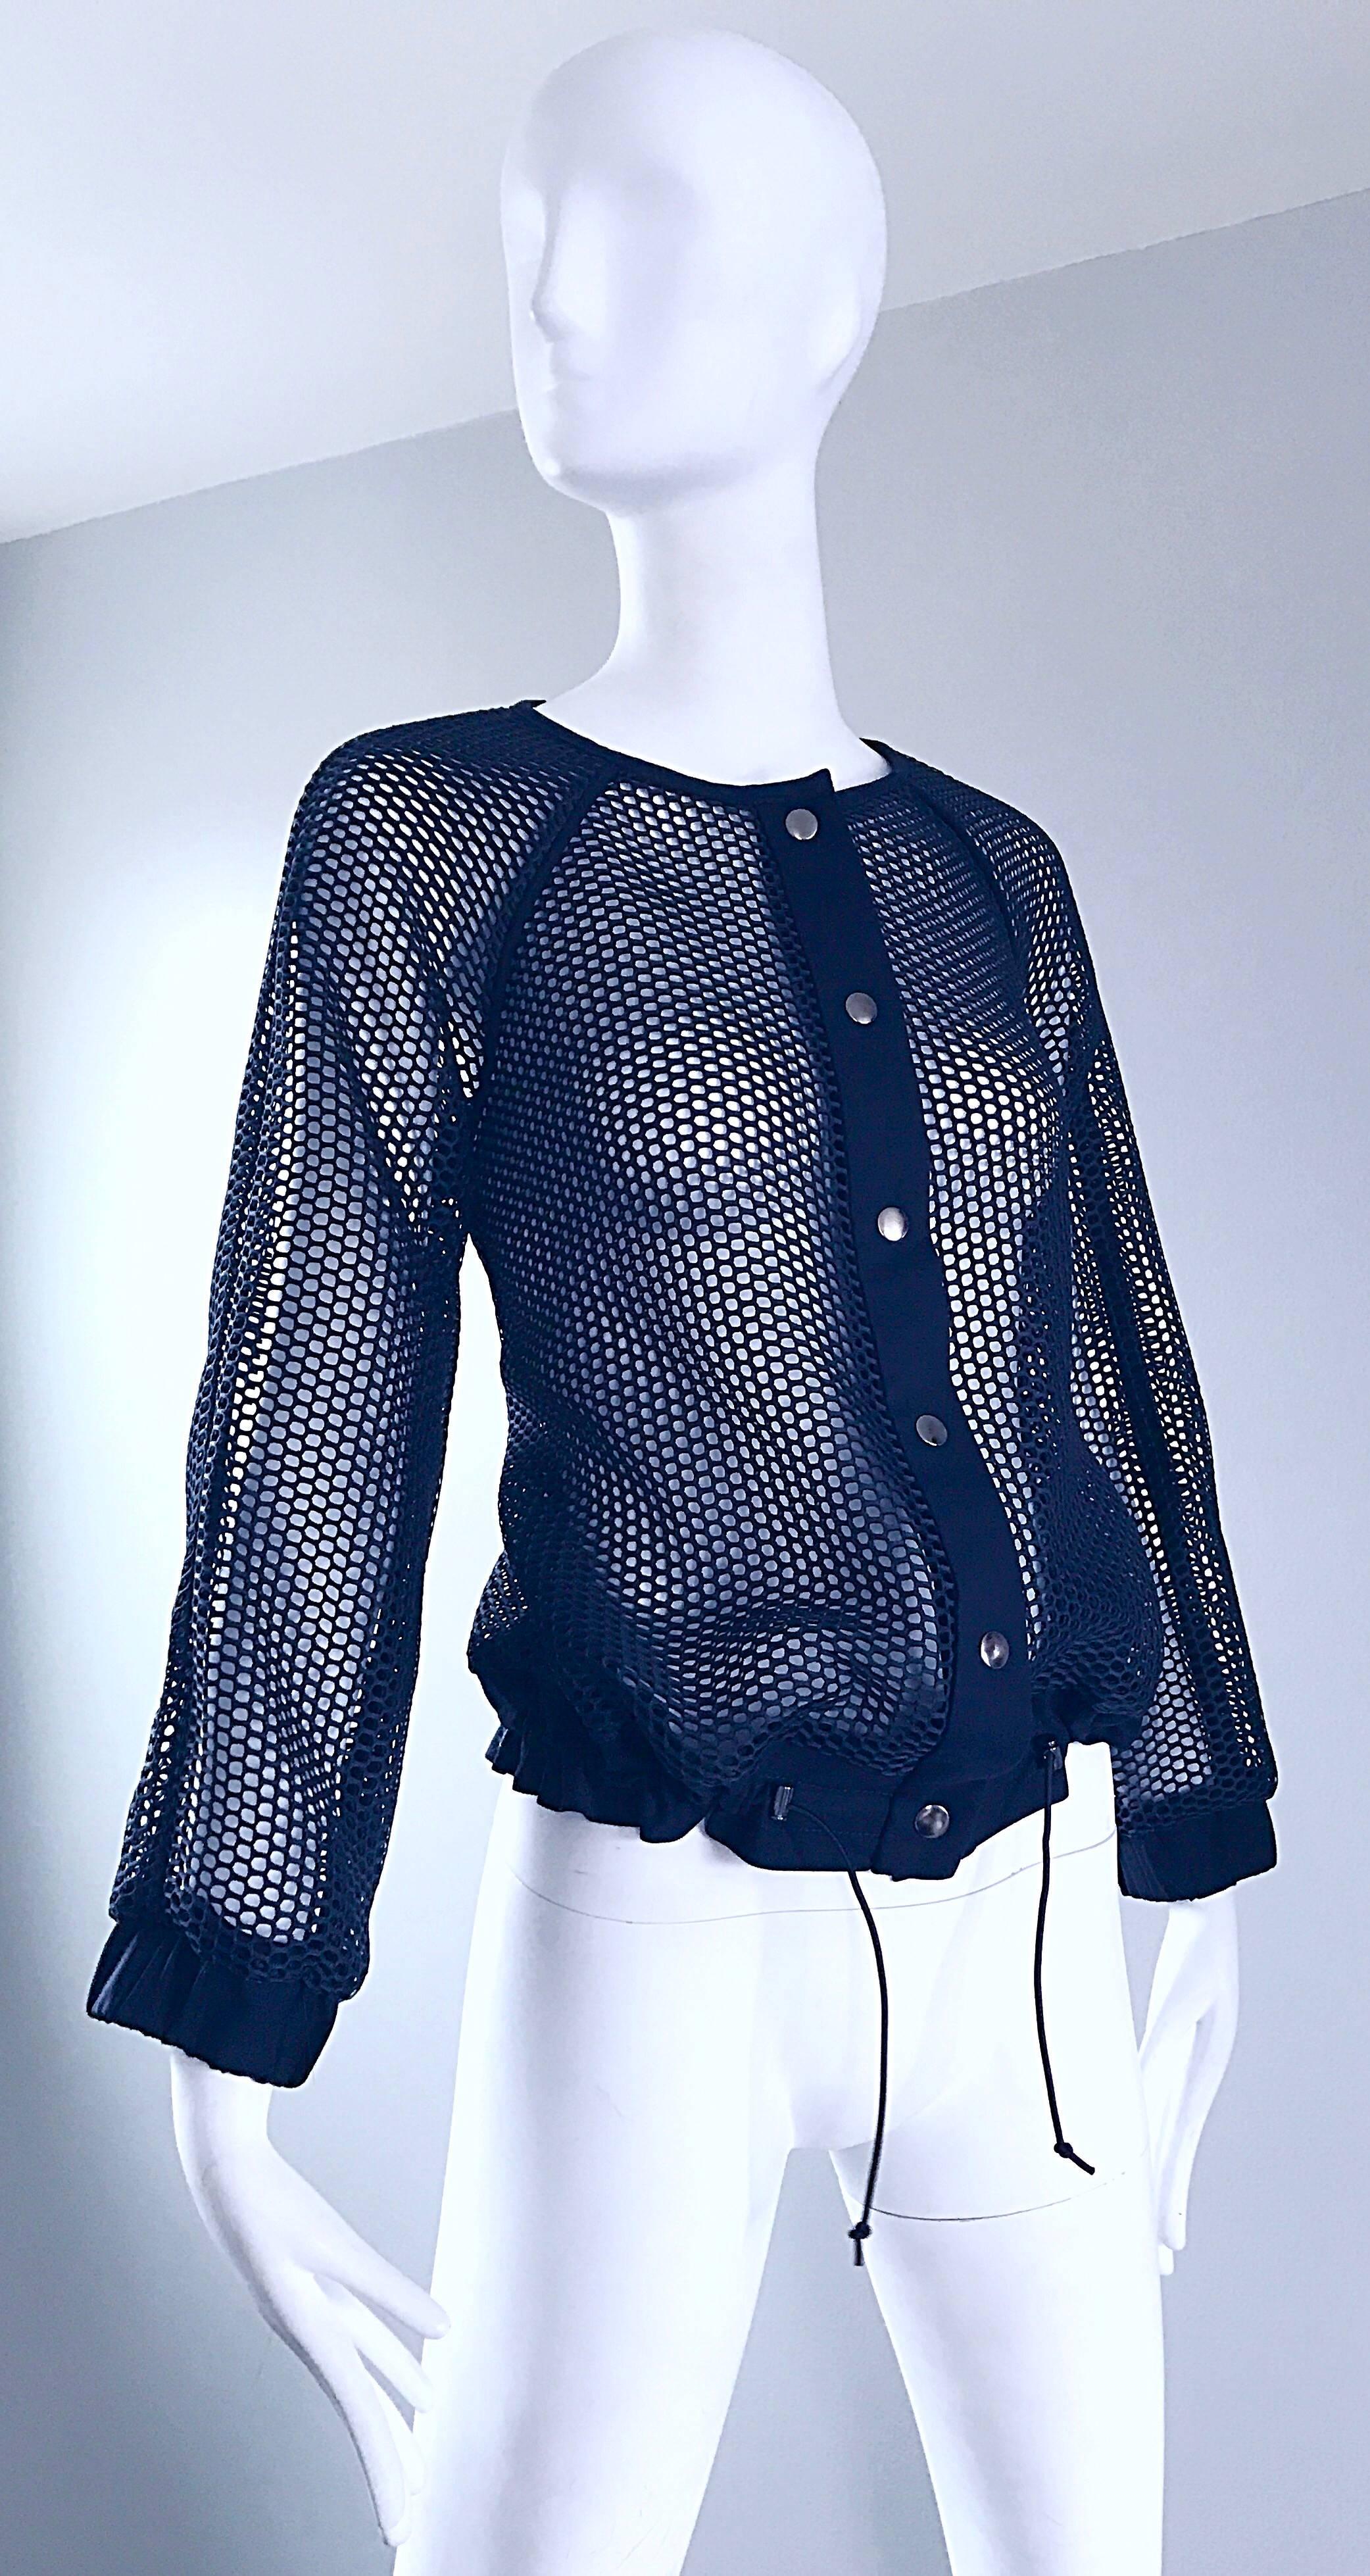 NWT Laver Navy Blue $795 Perforated Cut - Out Net Nautical Jacket Top Cover Up 2